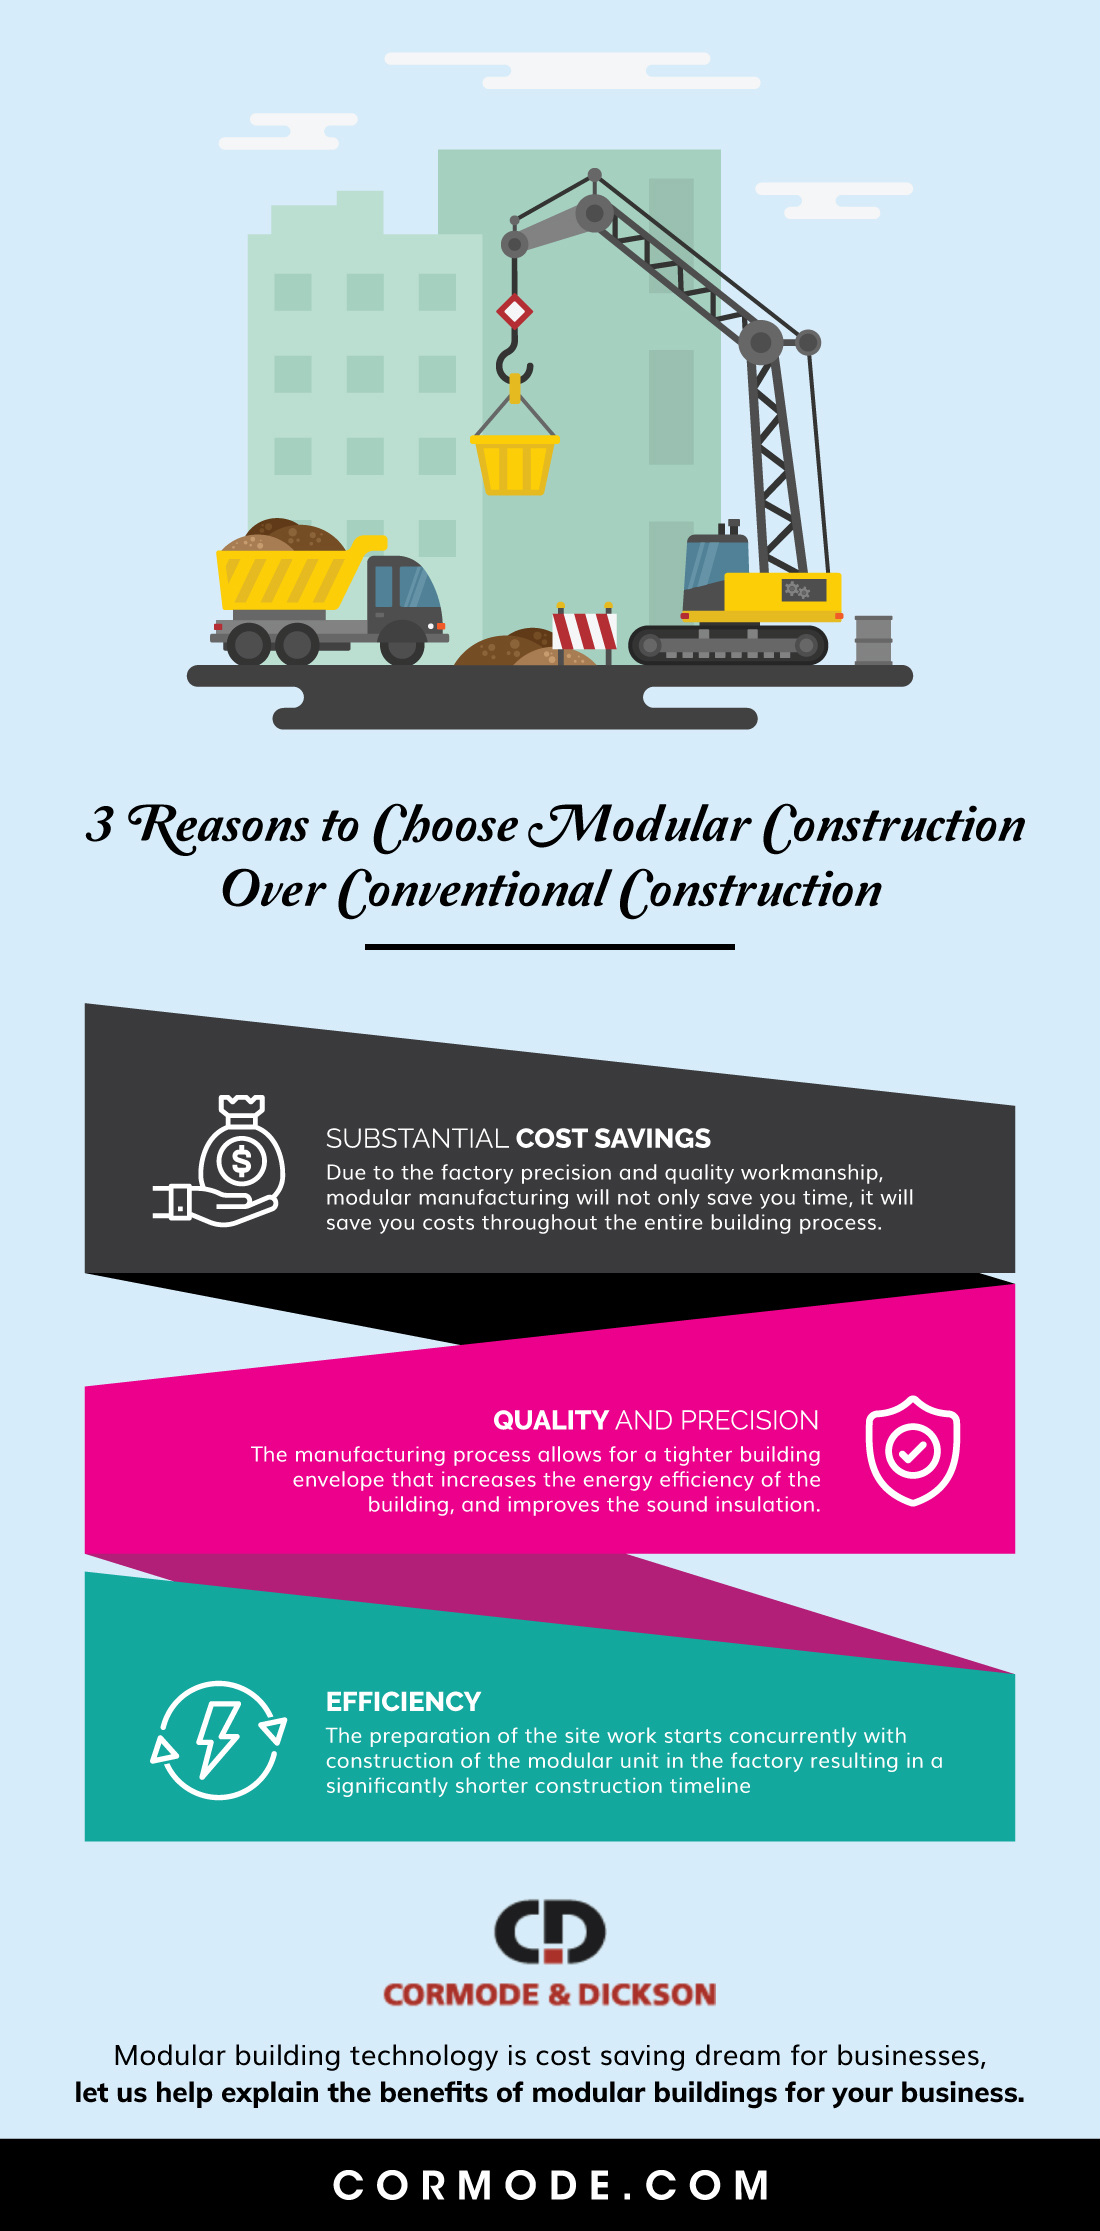 Conventional Construction